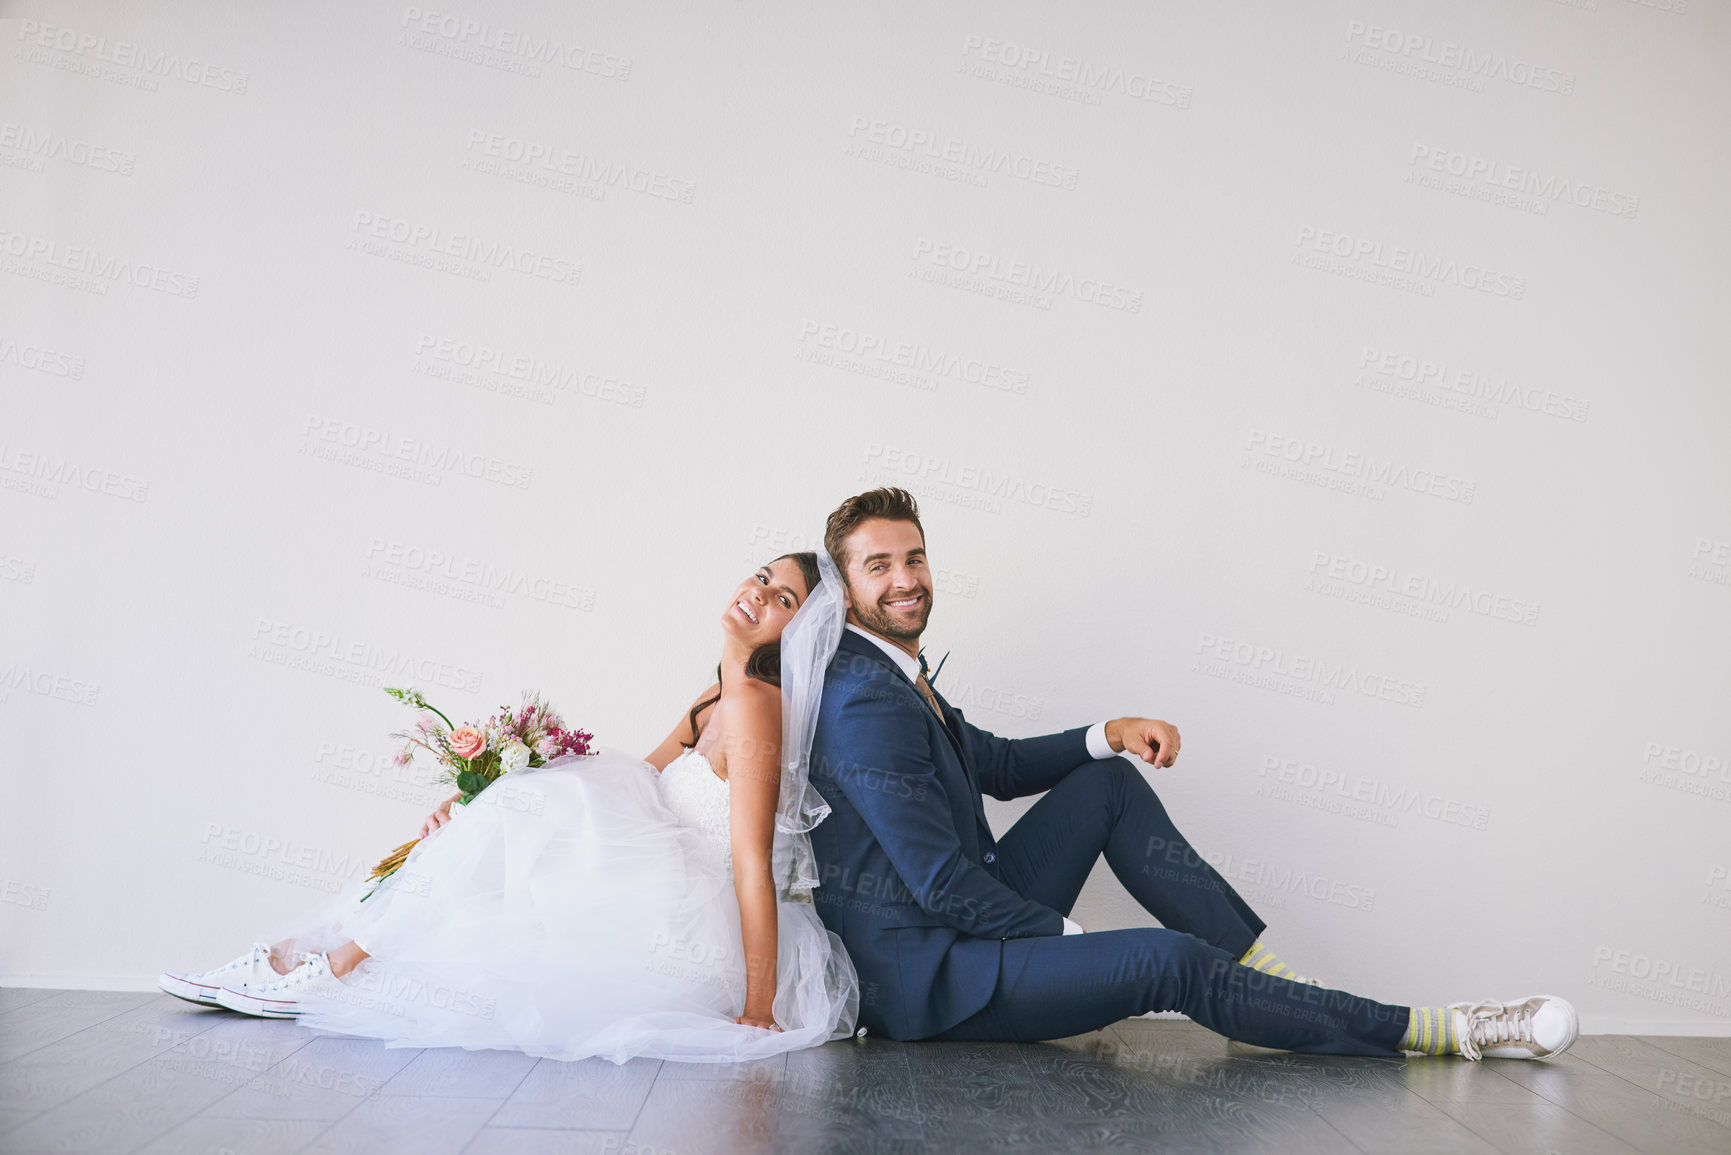 Buy stock photo Studio shot of a newly married young couple sitting back to back on the floor against a gray background